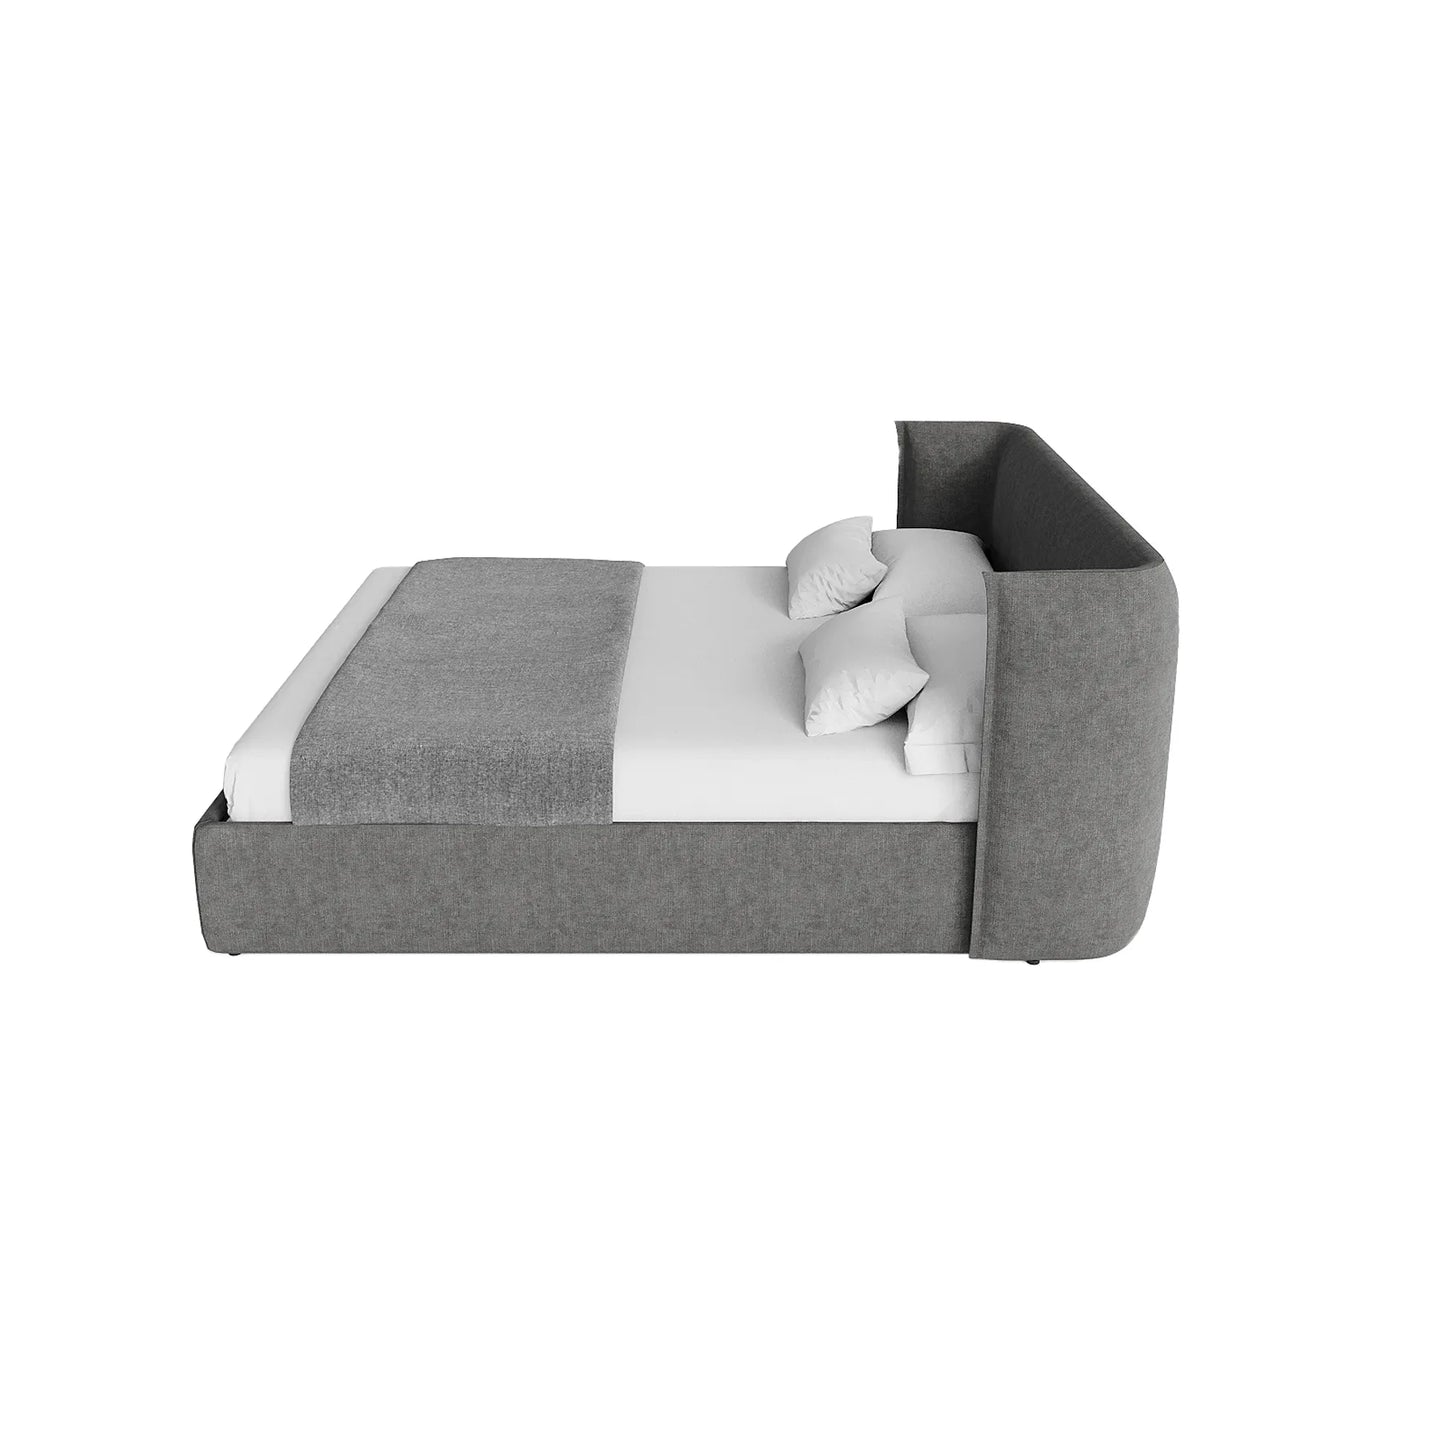 Embrace Queen Bed - Silex Shadow